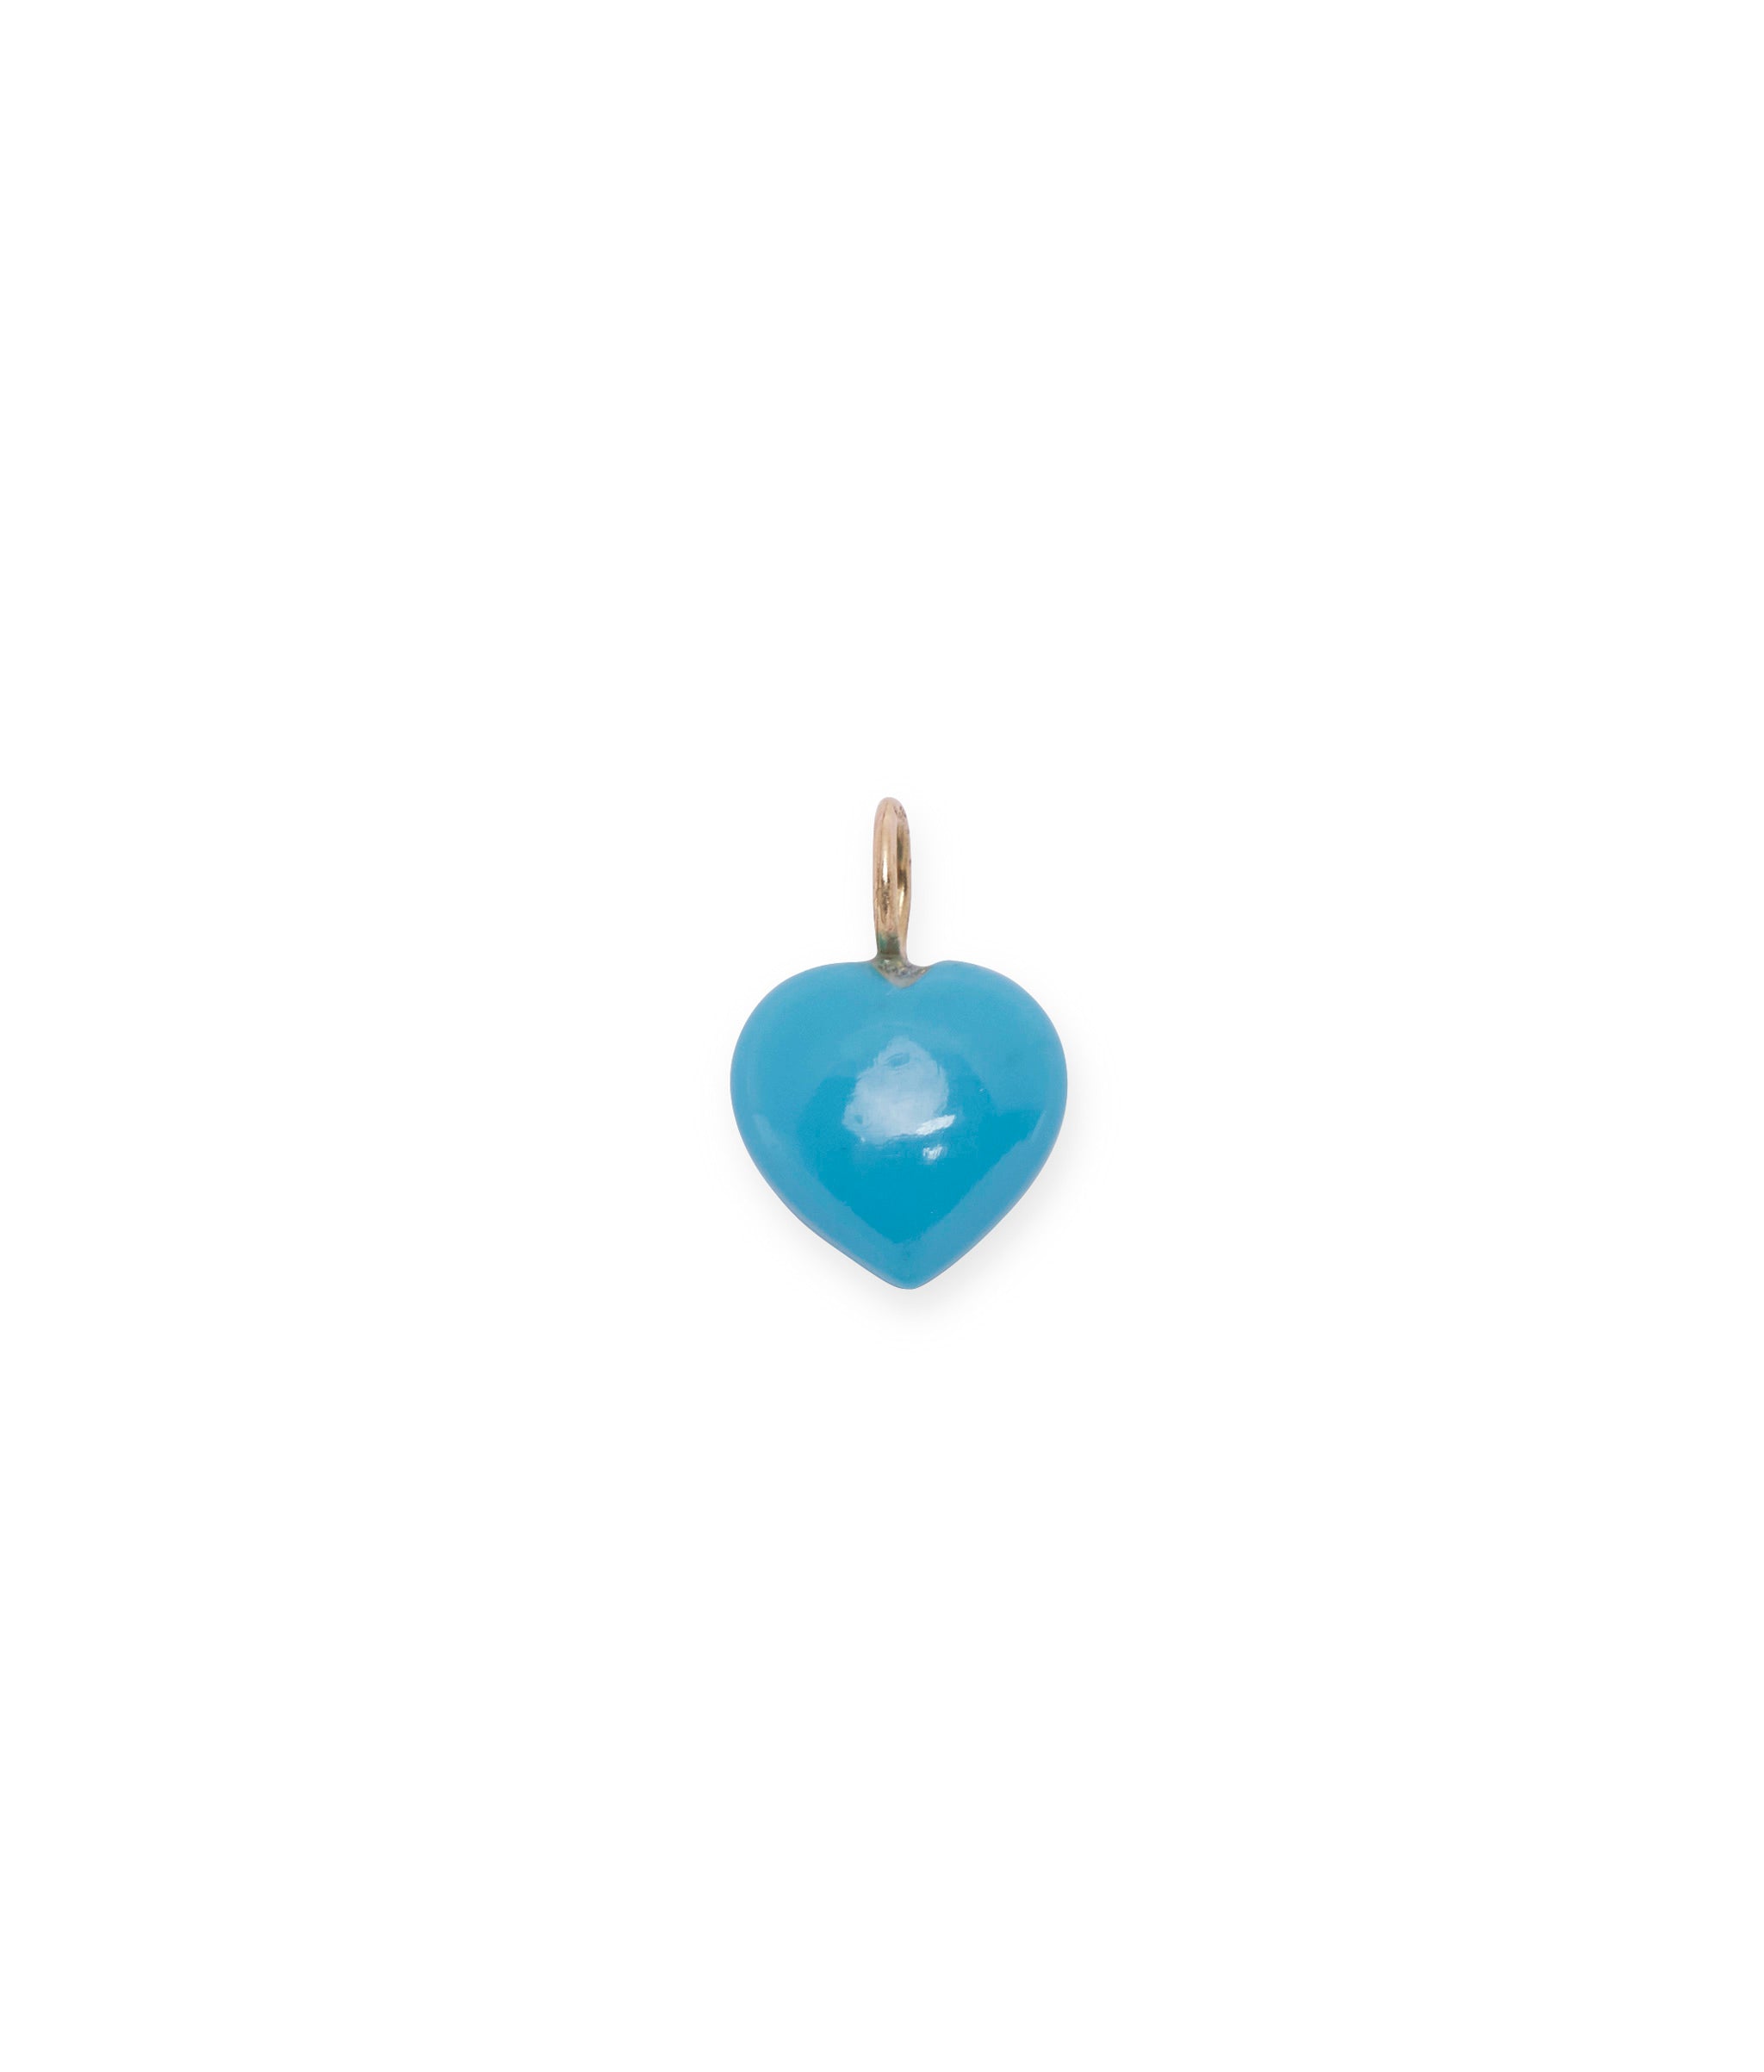 Puff Turquoise Heart 14K Necklace Charm. Small aqua heart with gold ring.